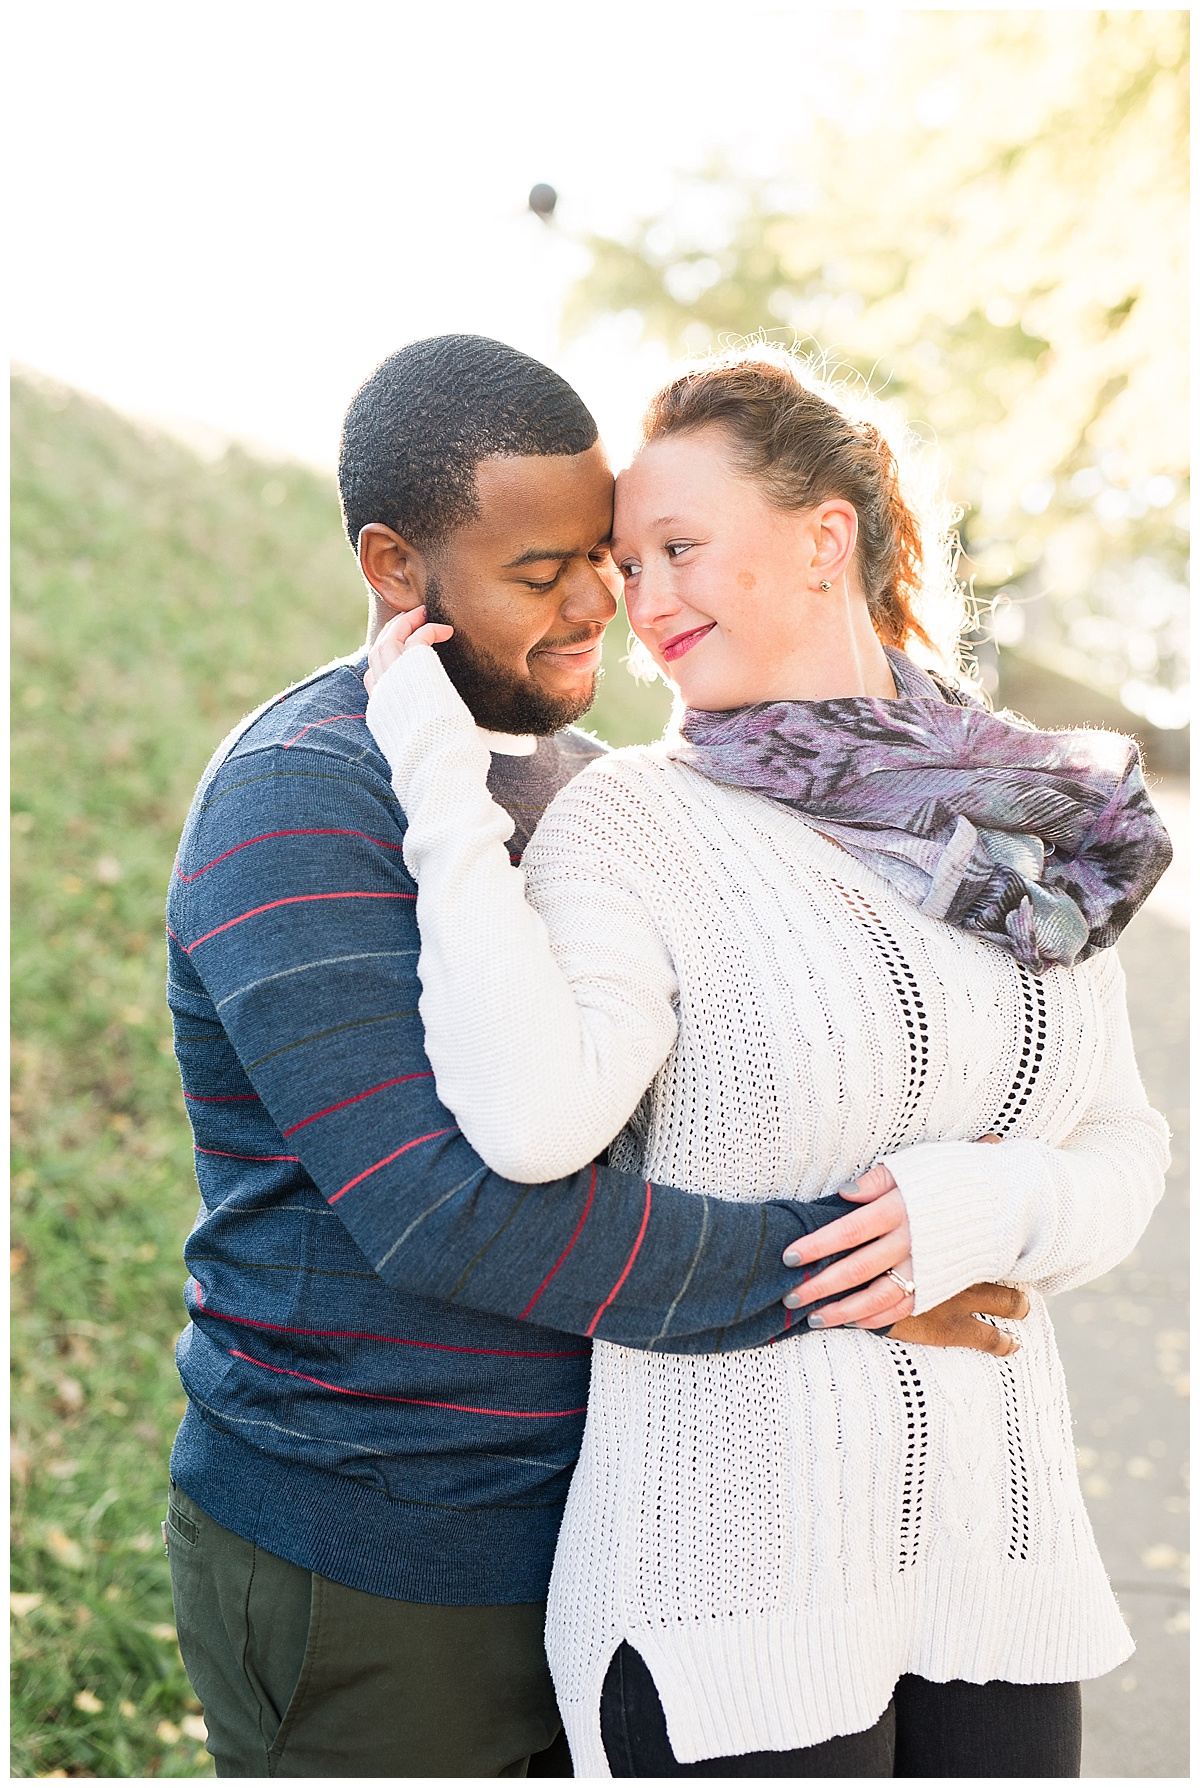 Richmond Engagement Session, Richmond Engagement Photos, Libby Hill Pictures, RVA Fall Photos, RVA Fall Engagement, Richmond Bride, Richmond Virginia, RVA photographer, Virginia Photographer, Prince George Photographer, Caiti Garter Photography